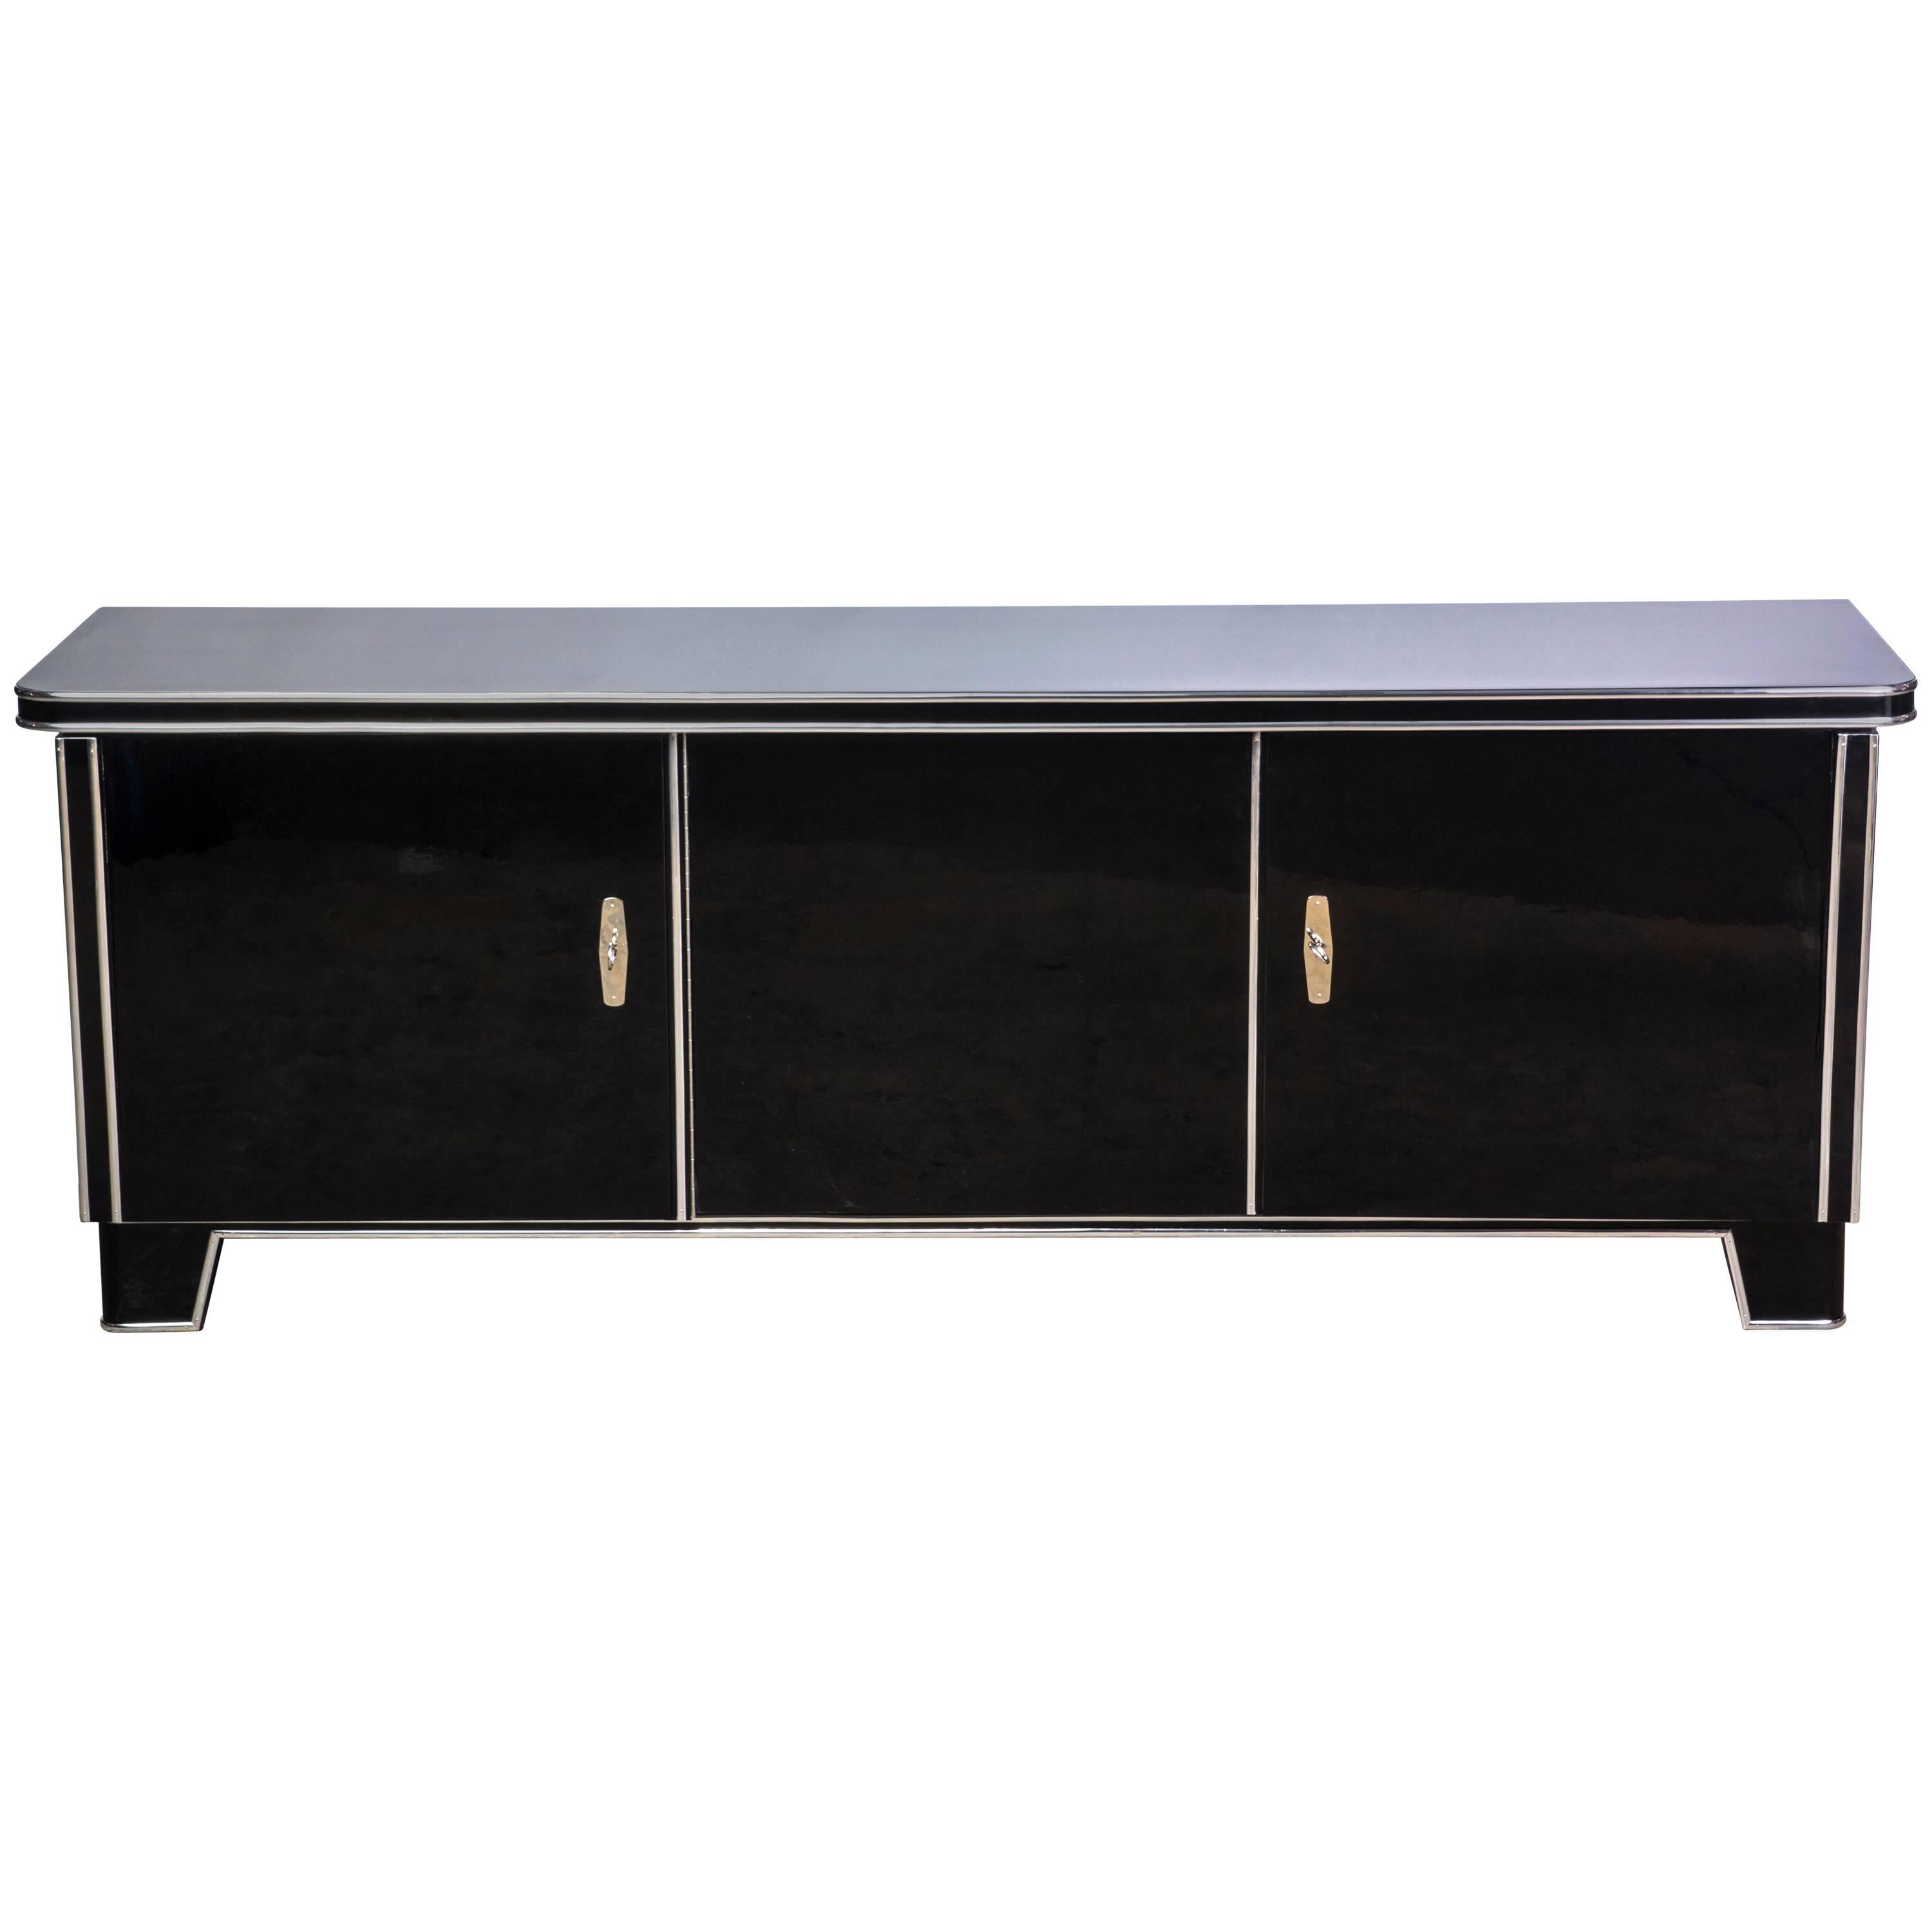 Magnificent Art Deco Low Board or Sideboard